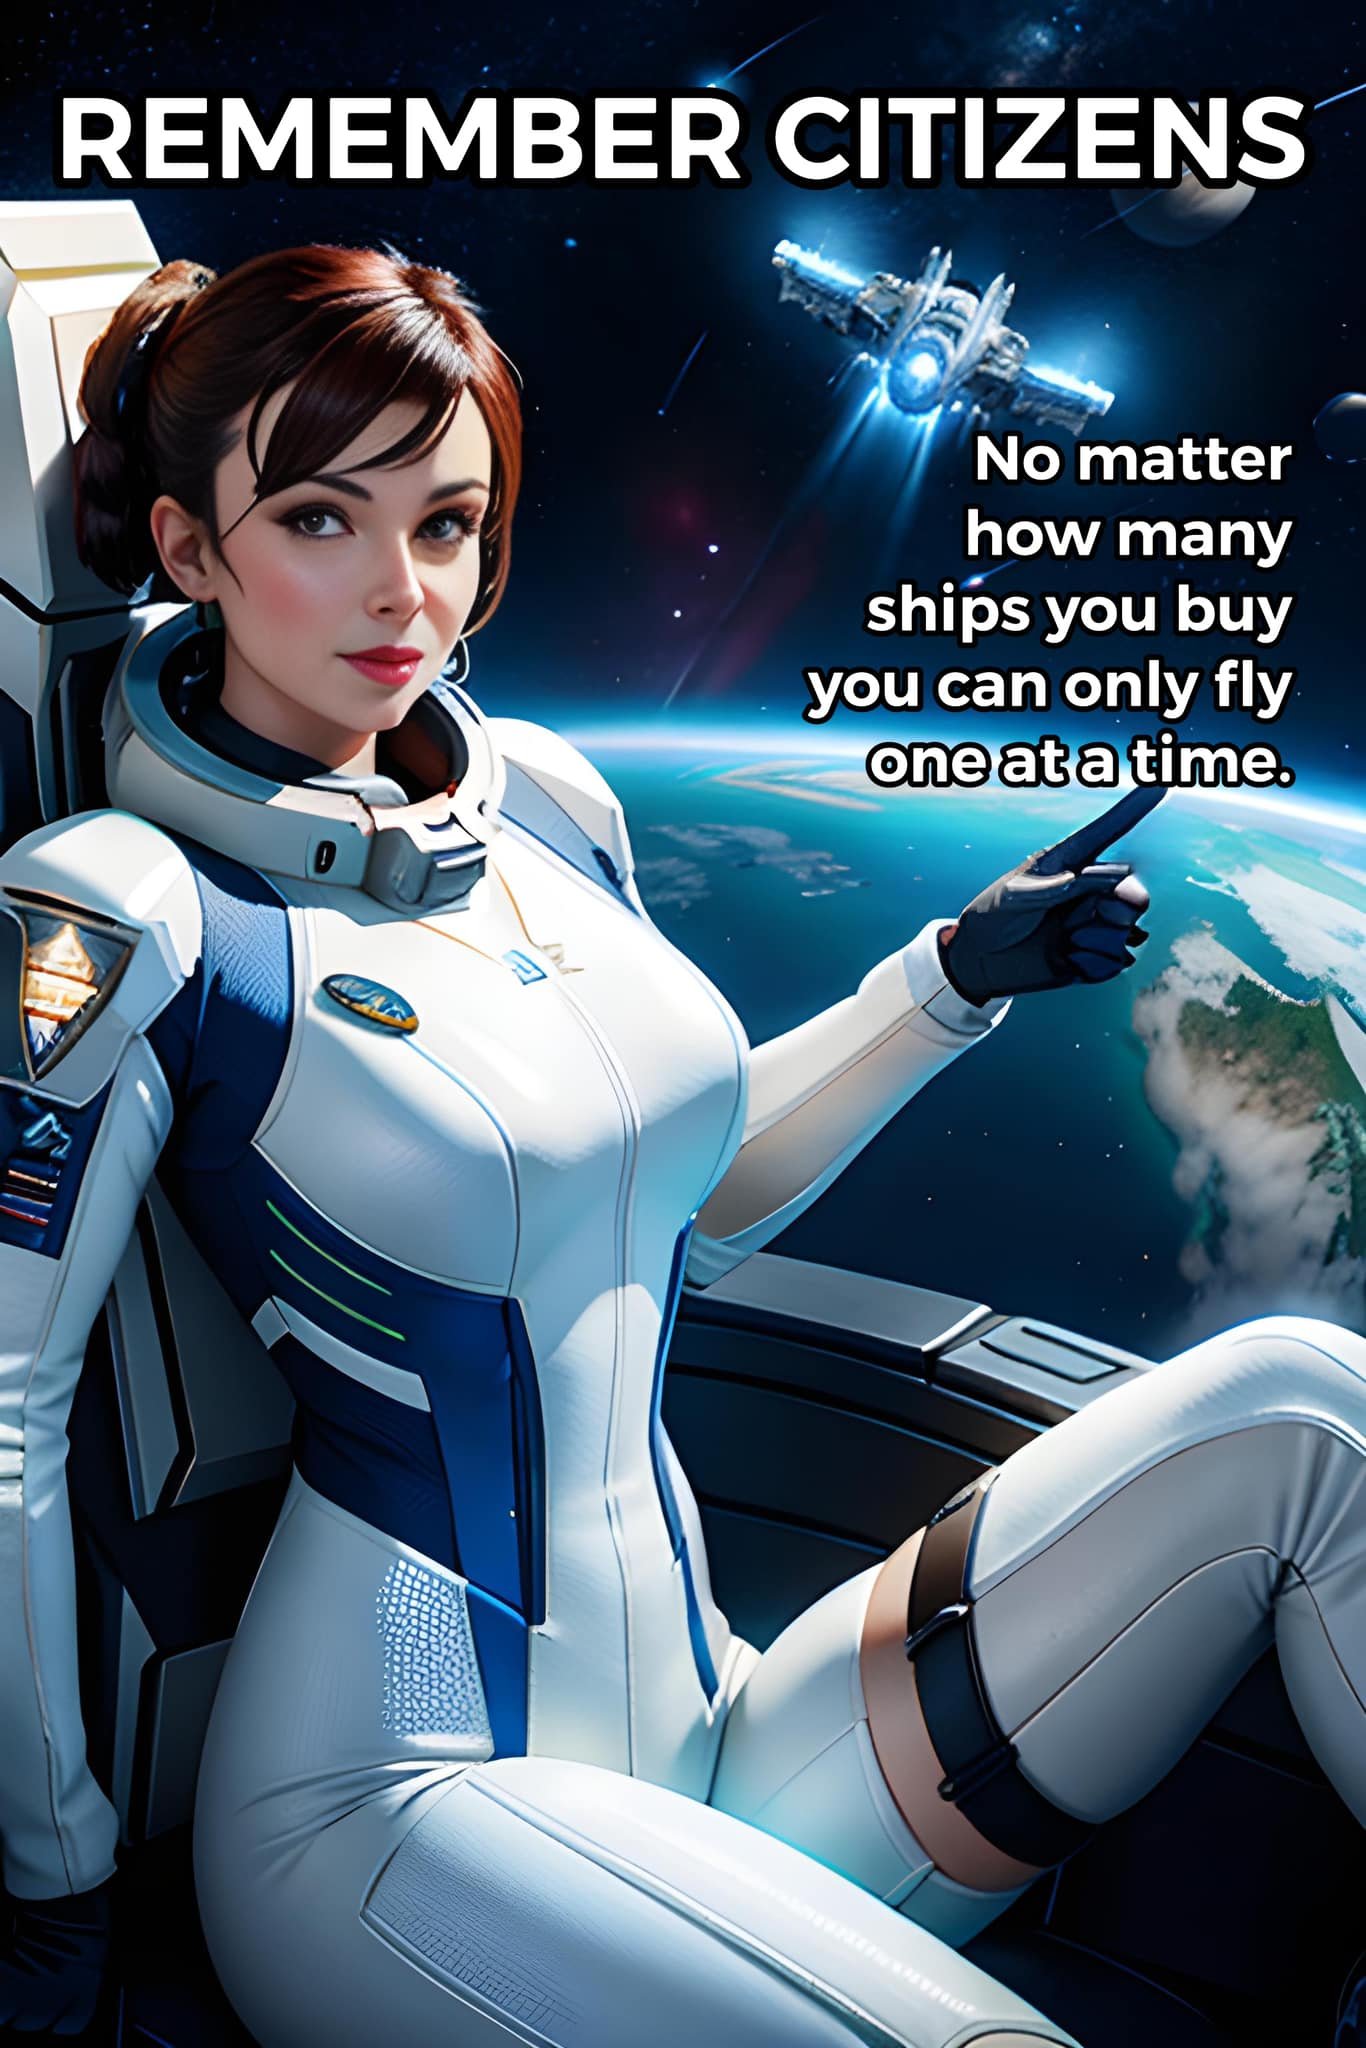 star-citizen-humor-one-ship-at-a-time.jpg